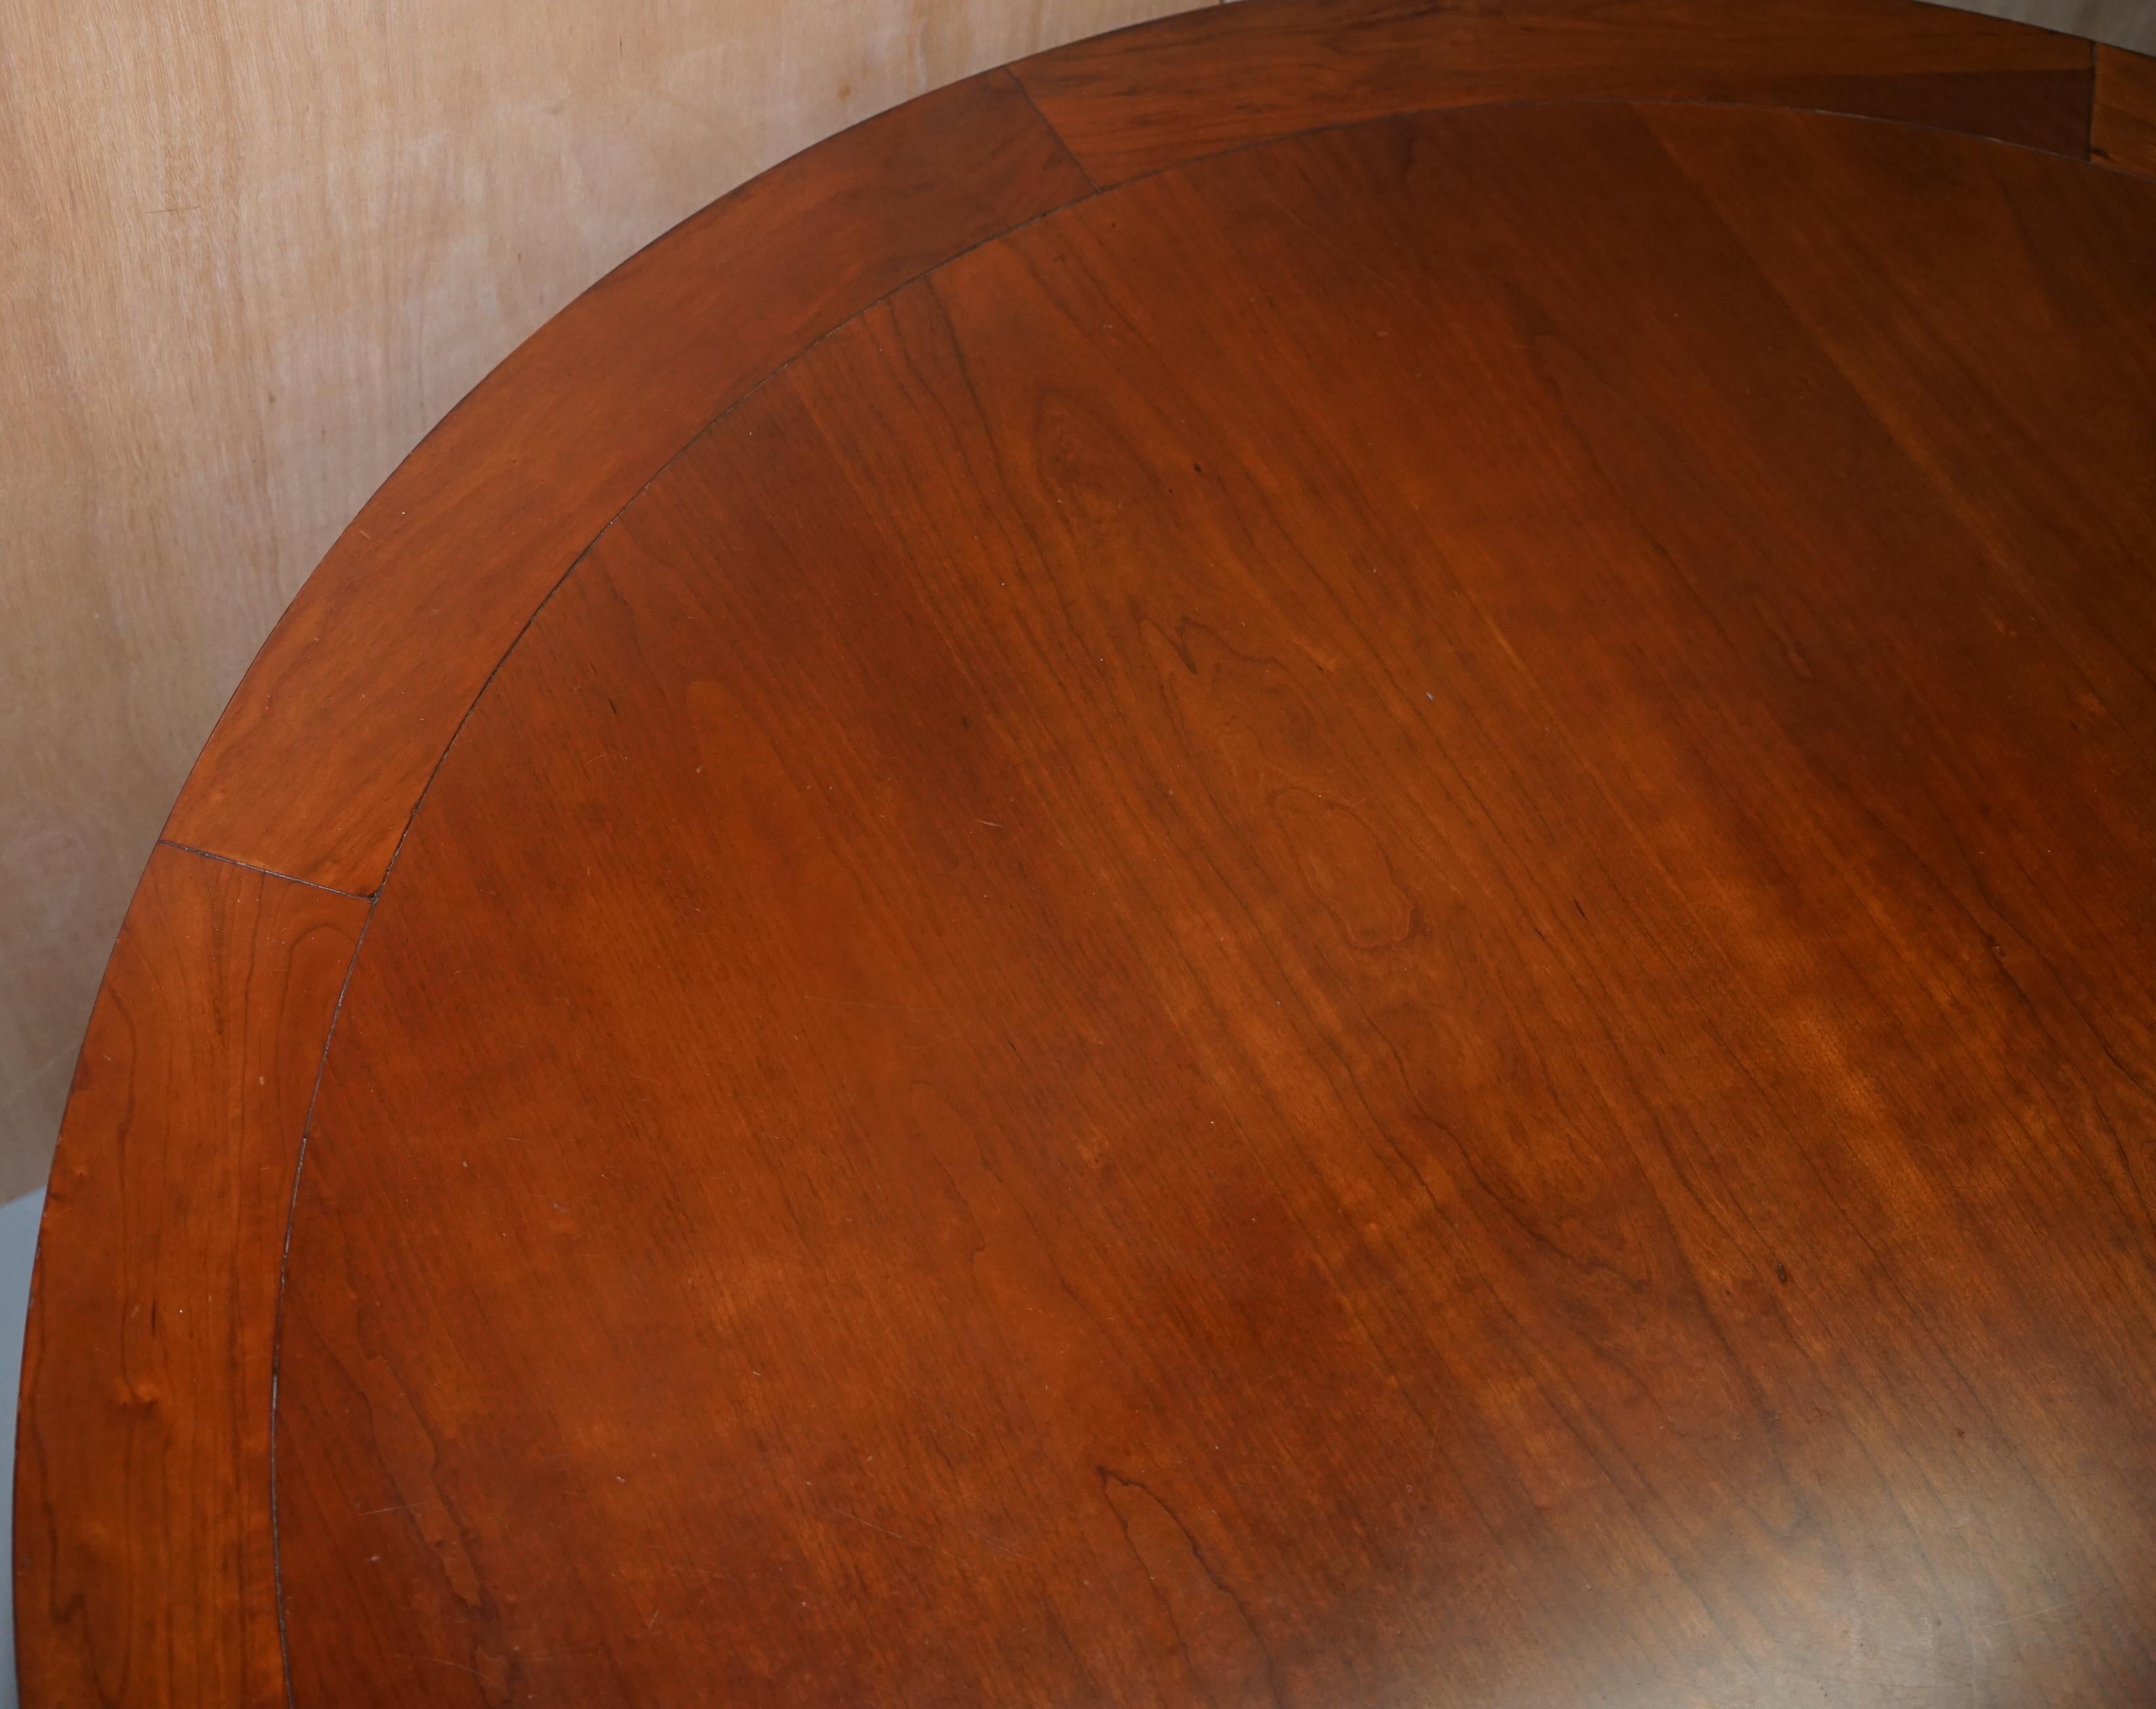 American Ralph Lauren Jamaica Cherrywood Large Round Dining Table 4-8 People